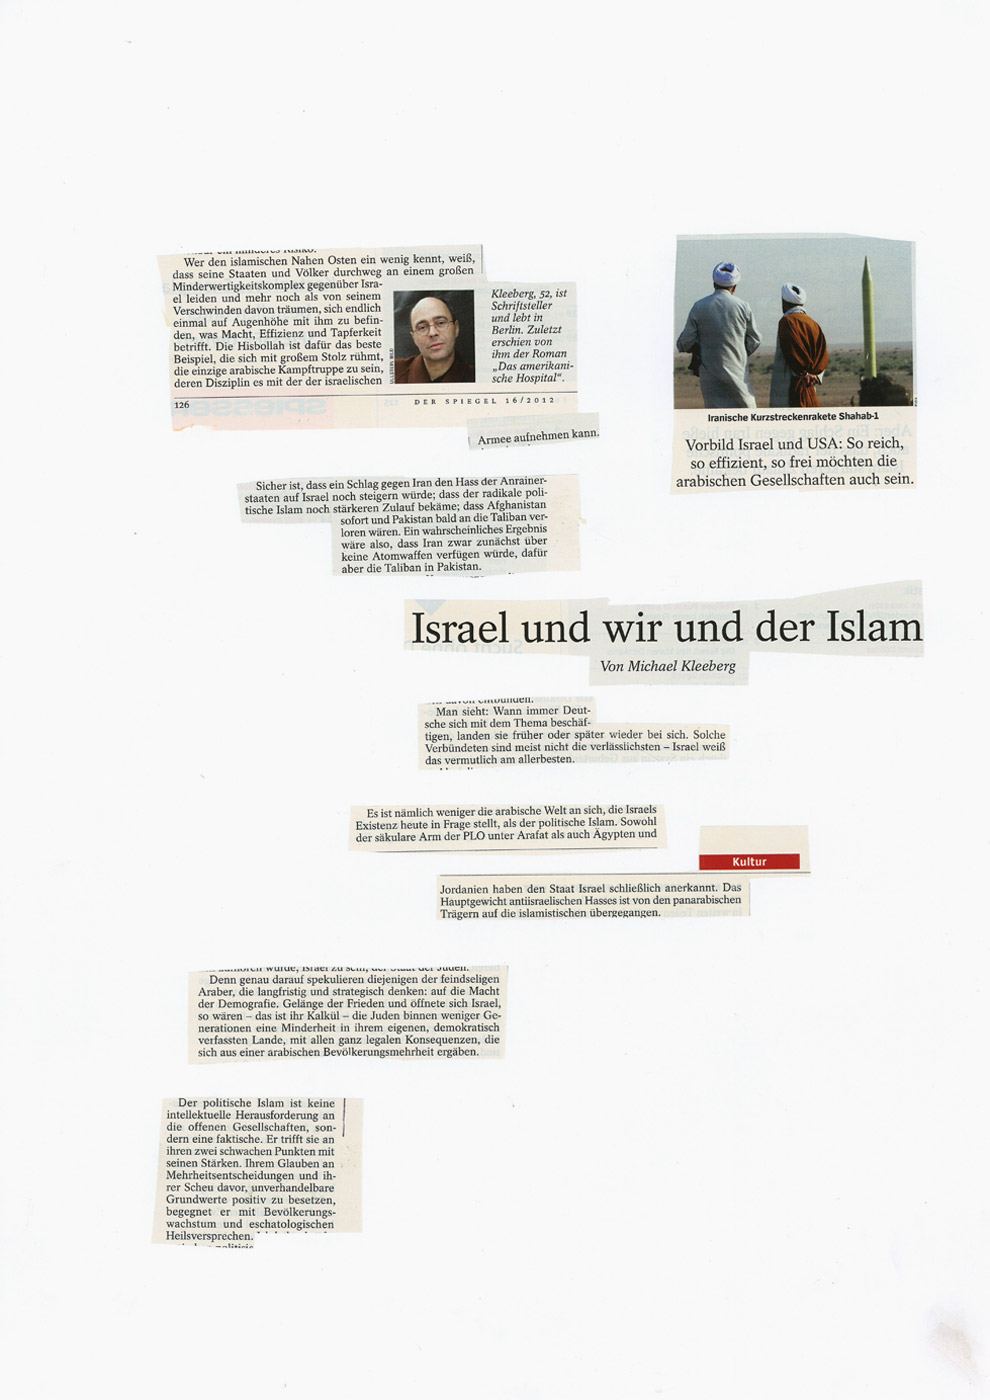 ter Hell · <strong>Israel und wir und der Islam</strong> [Israel and us and the Islam] · from the collage series 'L'article' · SpiegelBox 1 (2011–2013) · 42 x 30 cm